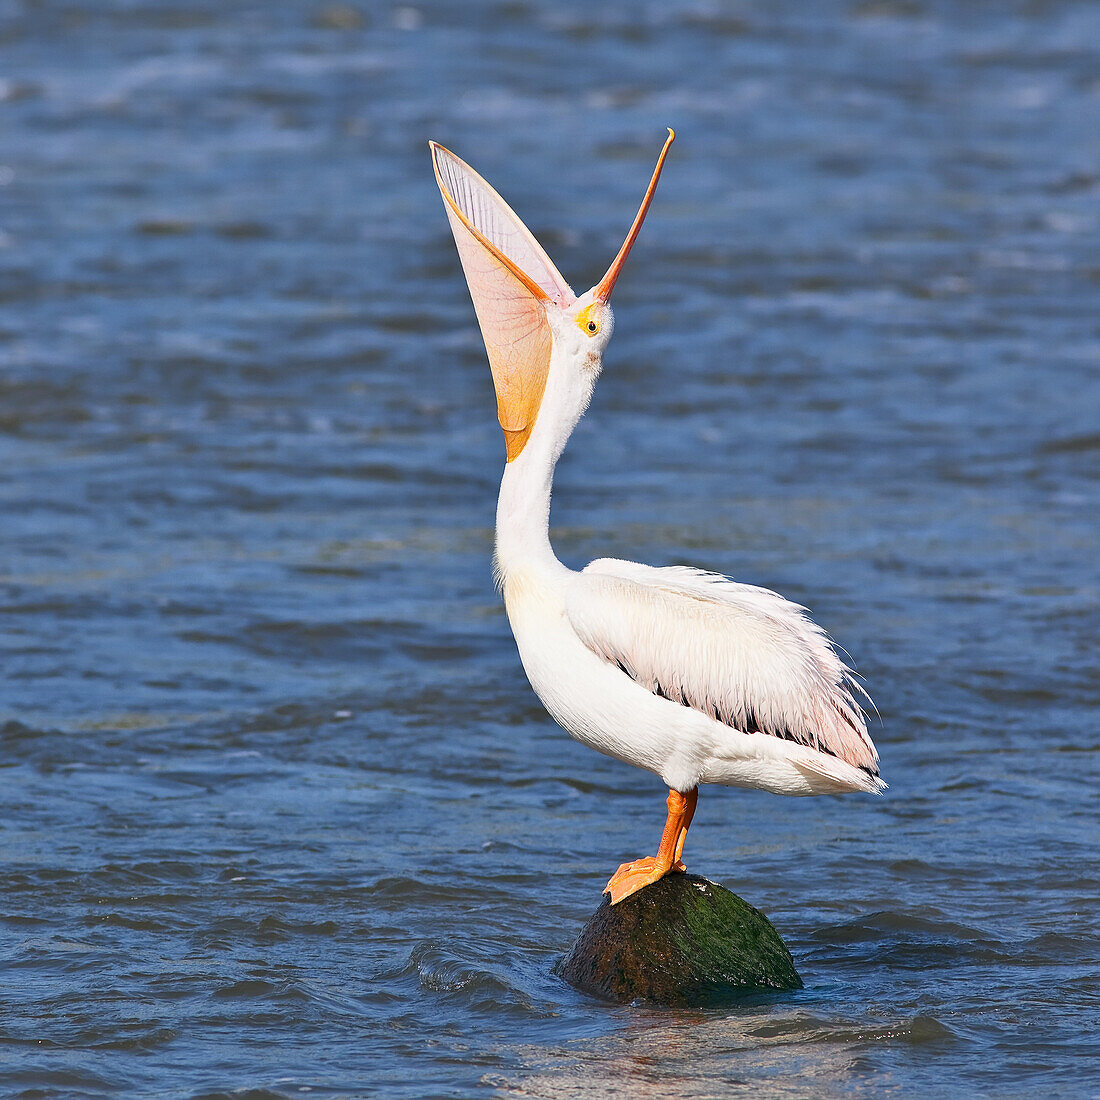 American White Pelican with mouth wide open, Red River, Lockport, Manitoba